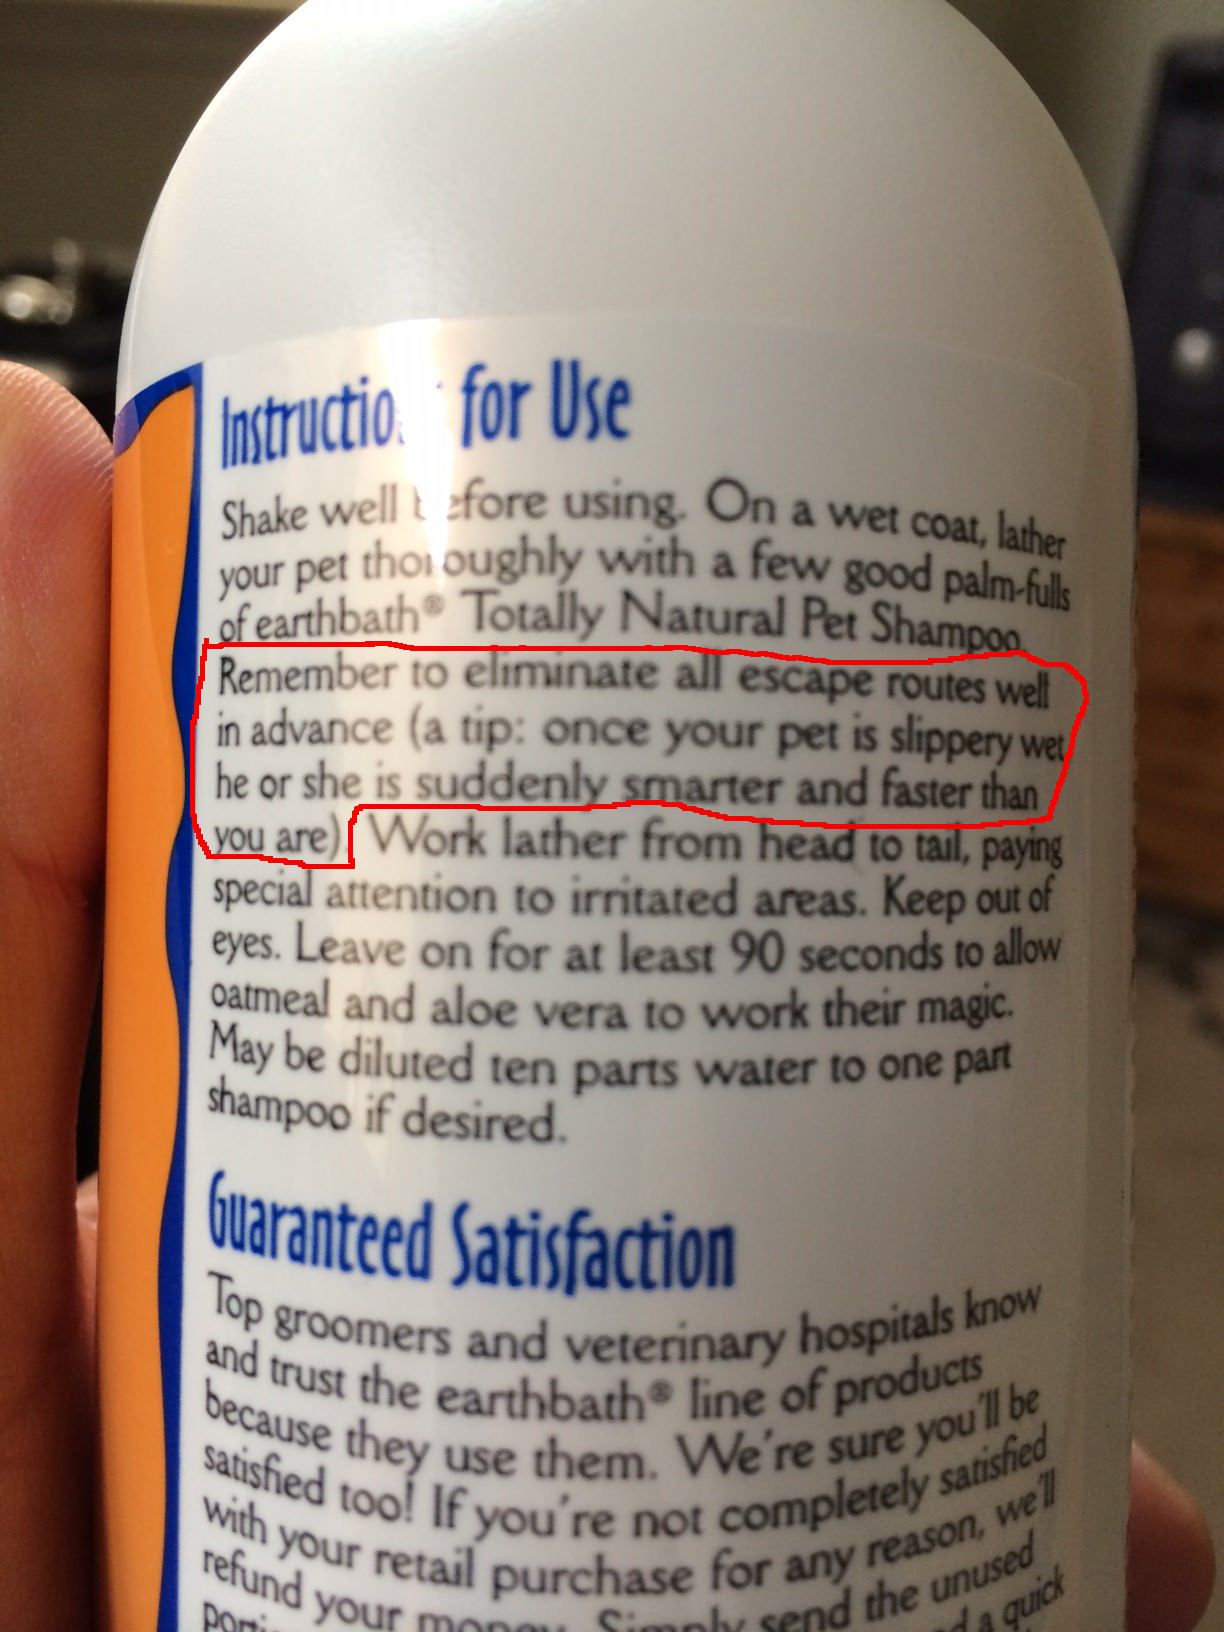 The instructions for this new dog shampoo